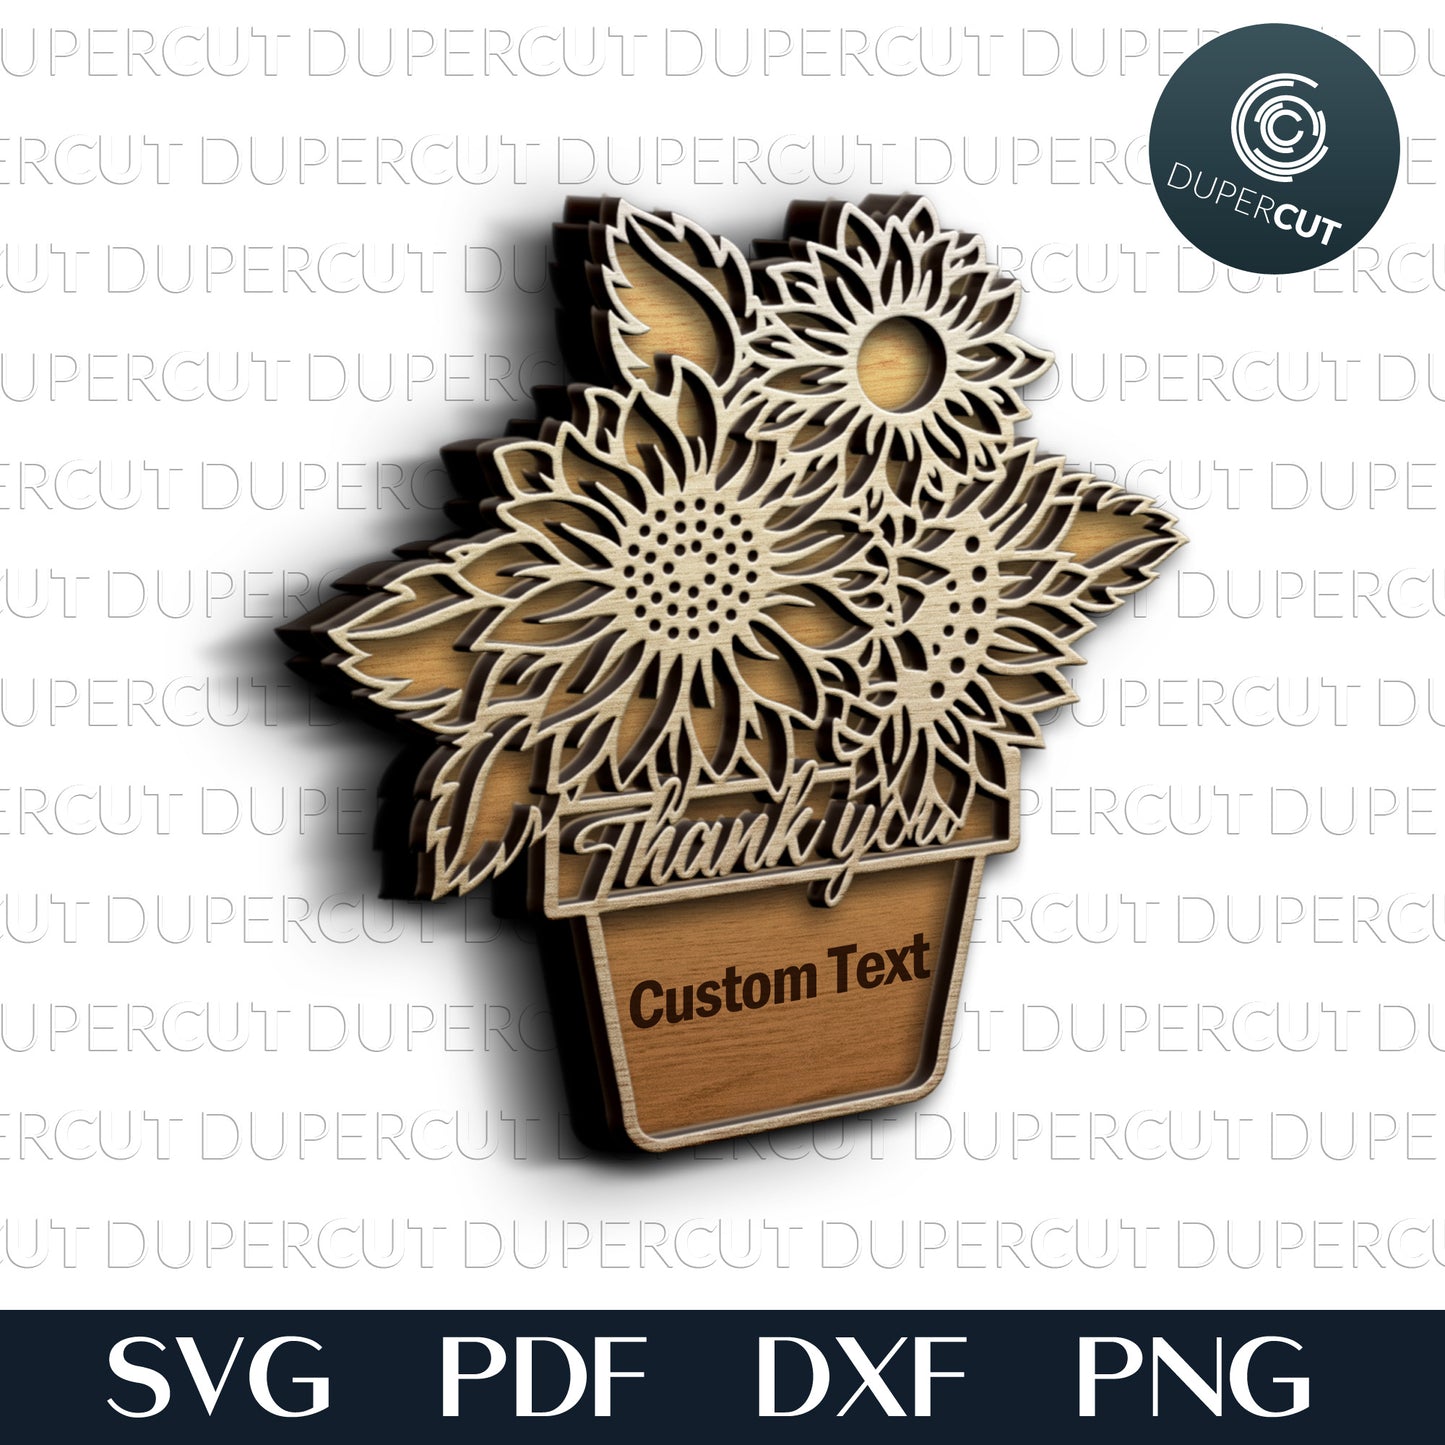 Sunflower pot - add custom name - teacher gift  SVG PDF DXF layered vector files for Cricut, Silhouette Cameo, Glowforge, laser machines